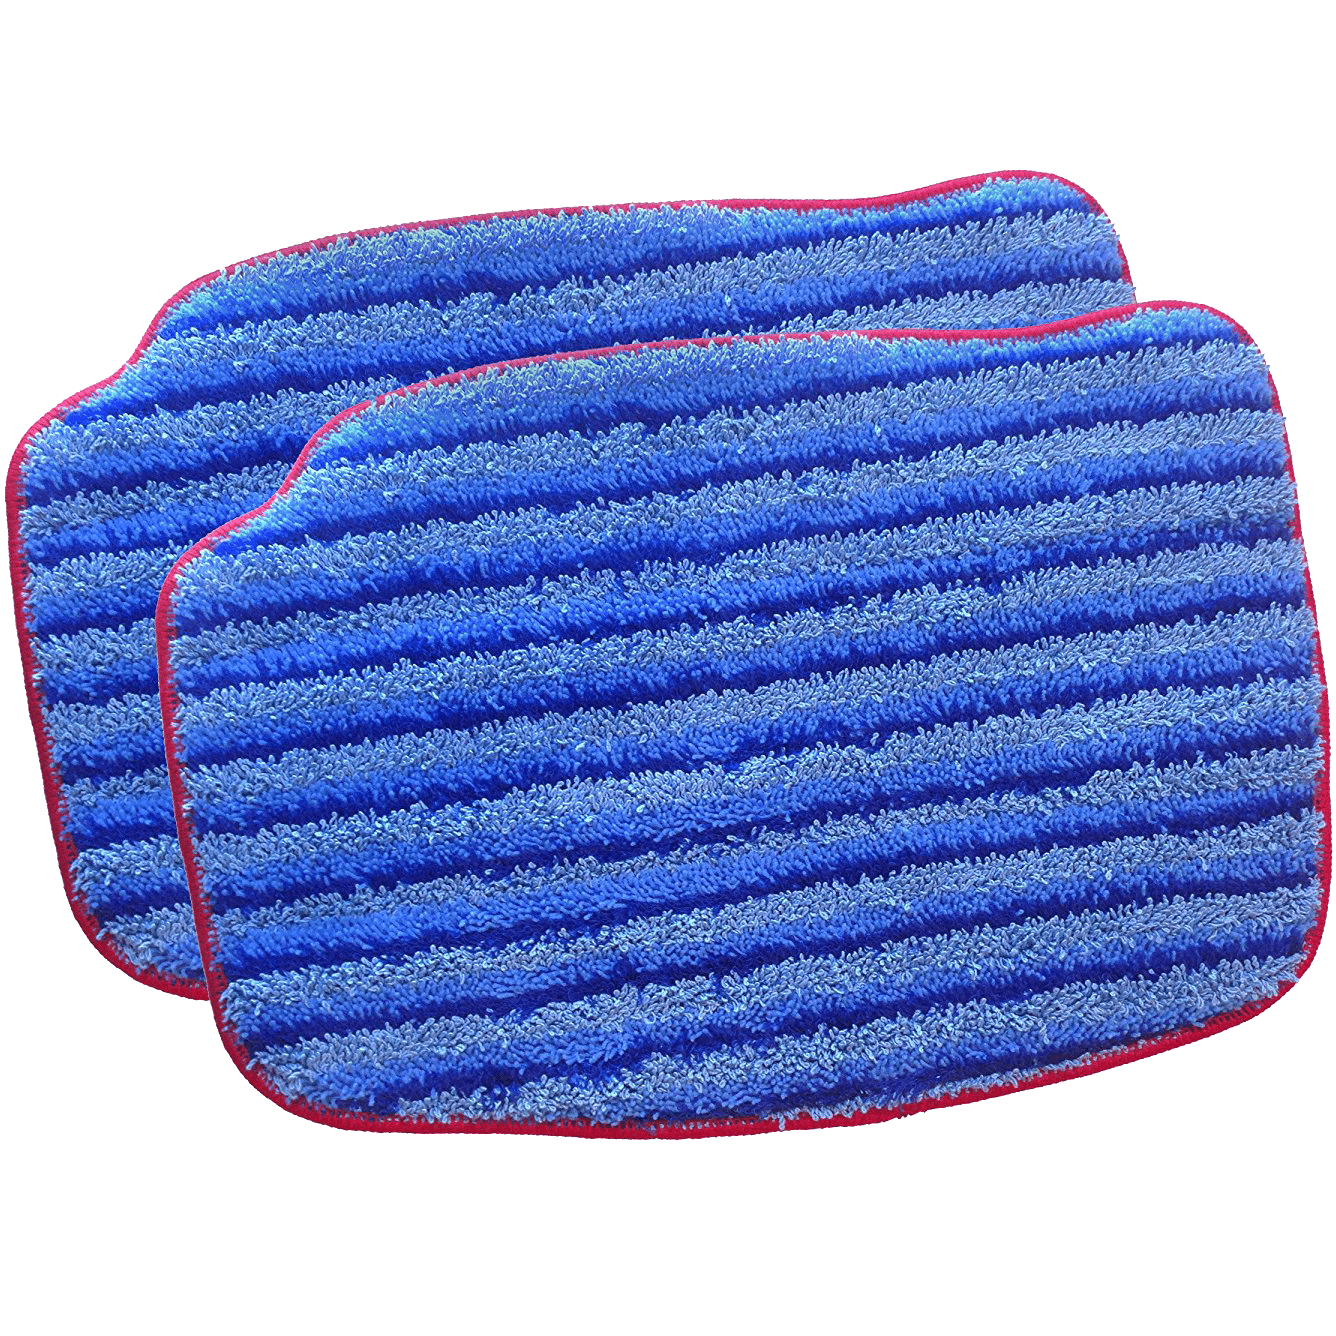 McCulloch Scrubbing Microfiber Replacement Pad (2-Pack)